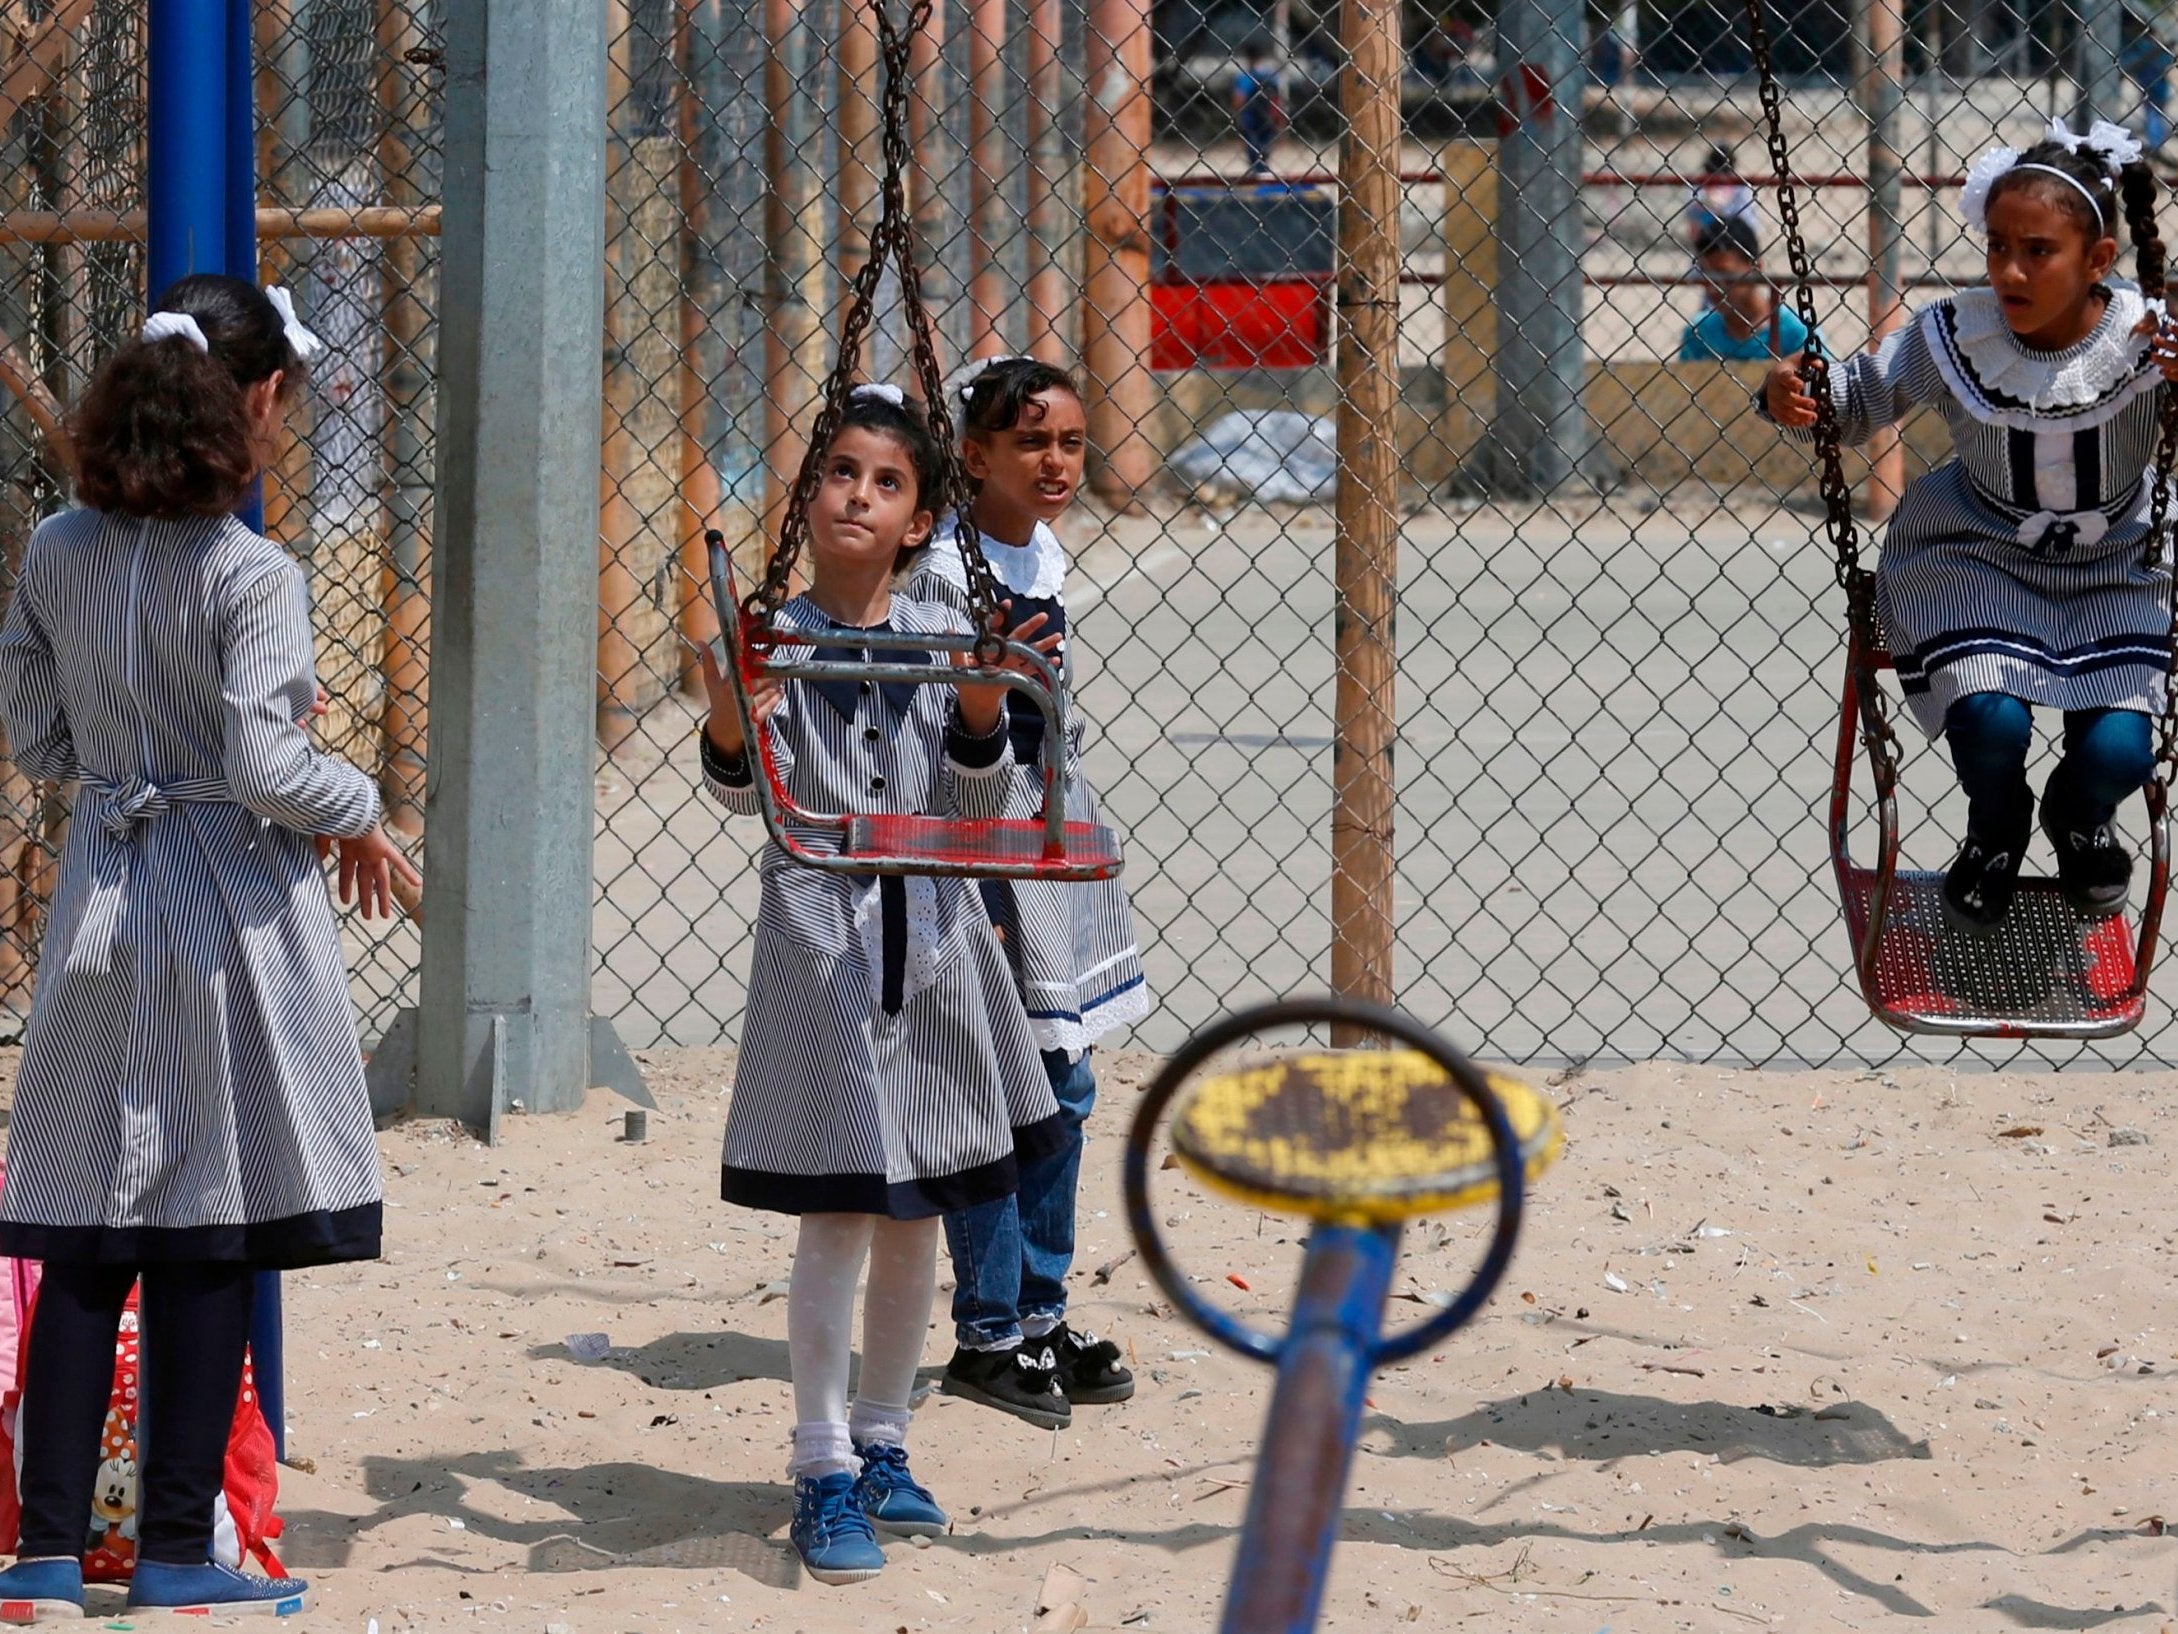 The UN agency provides education, health services, and food aid to Palestinian refugees